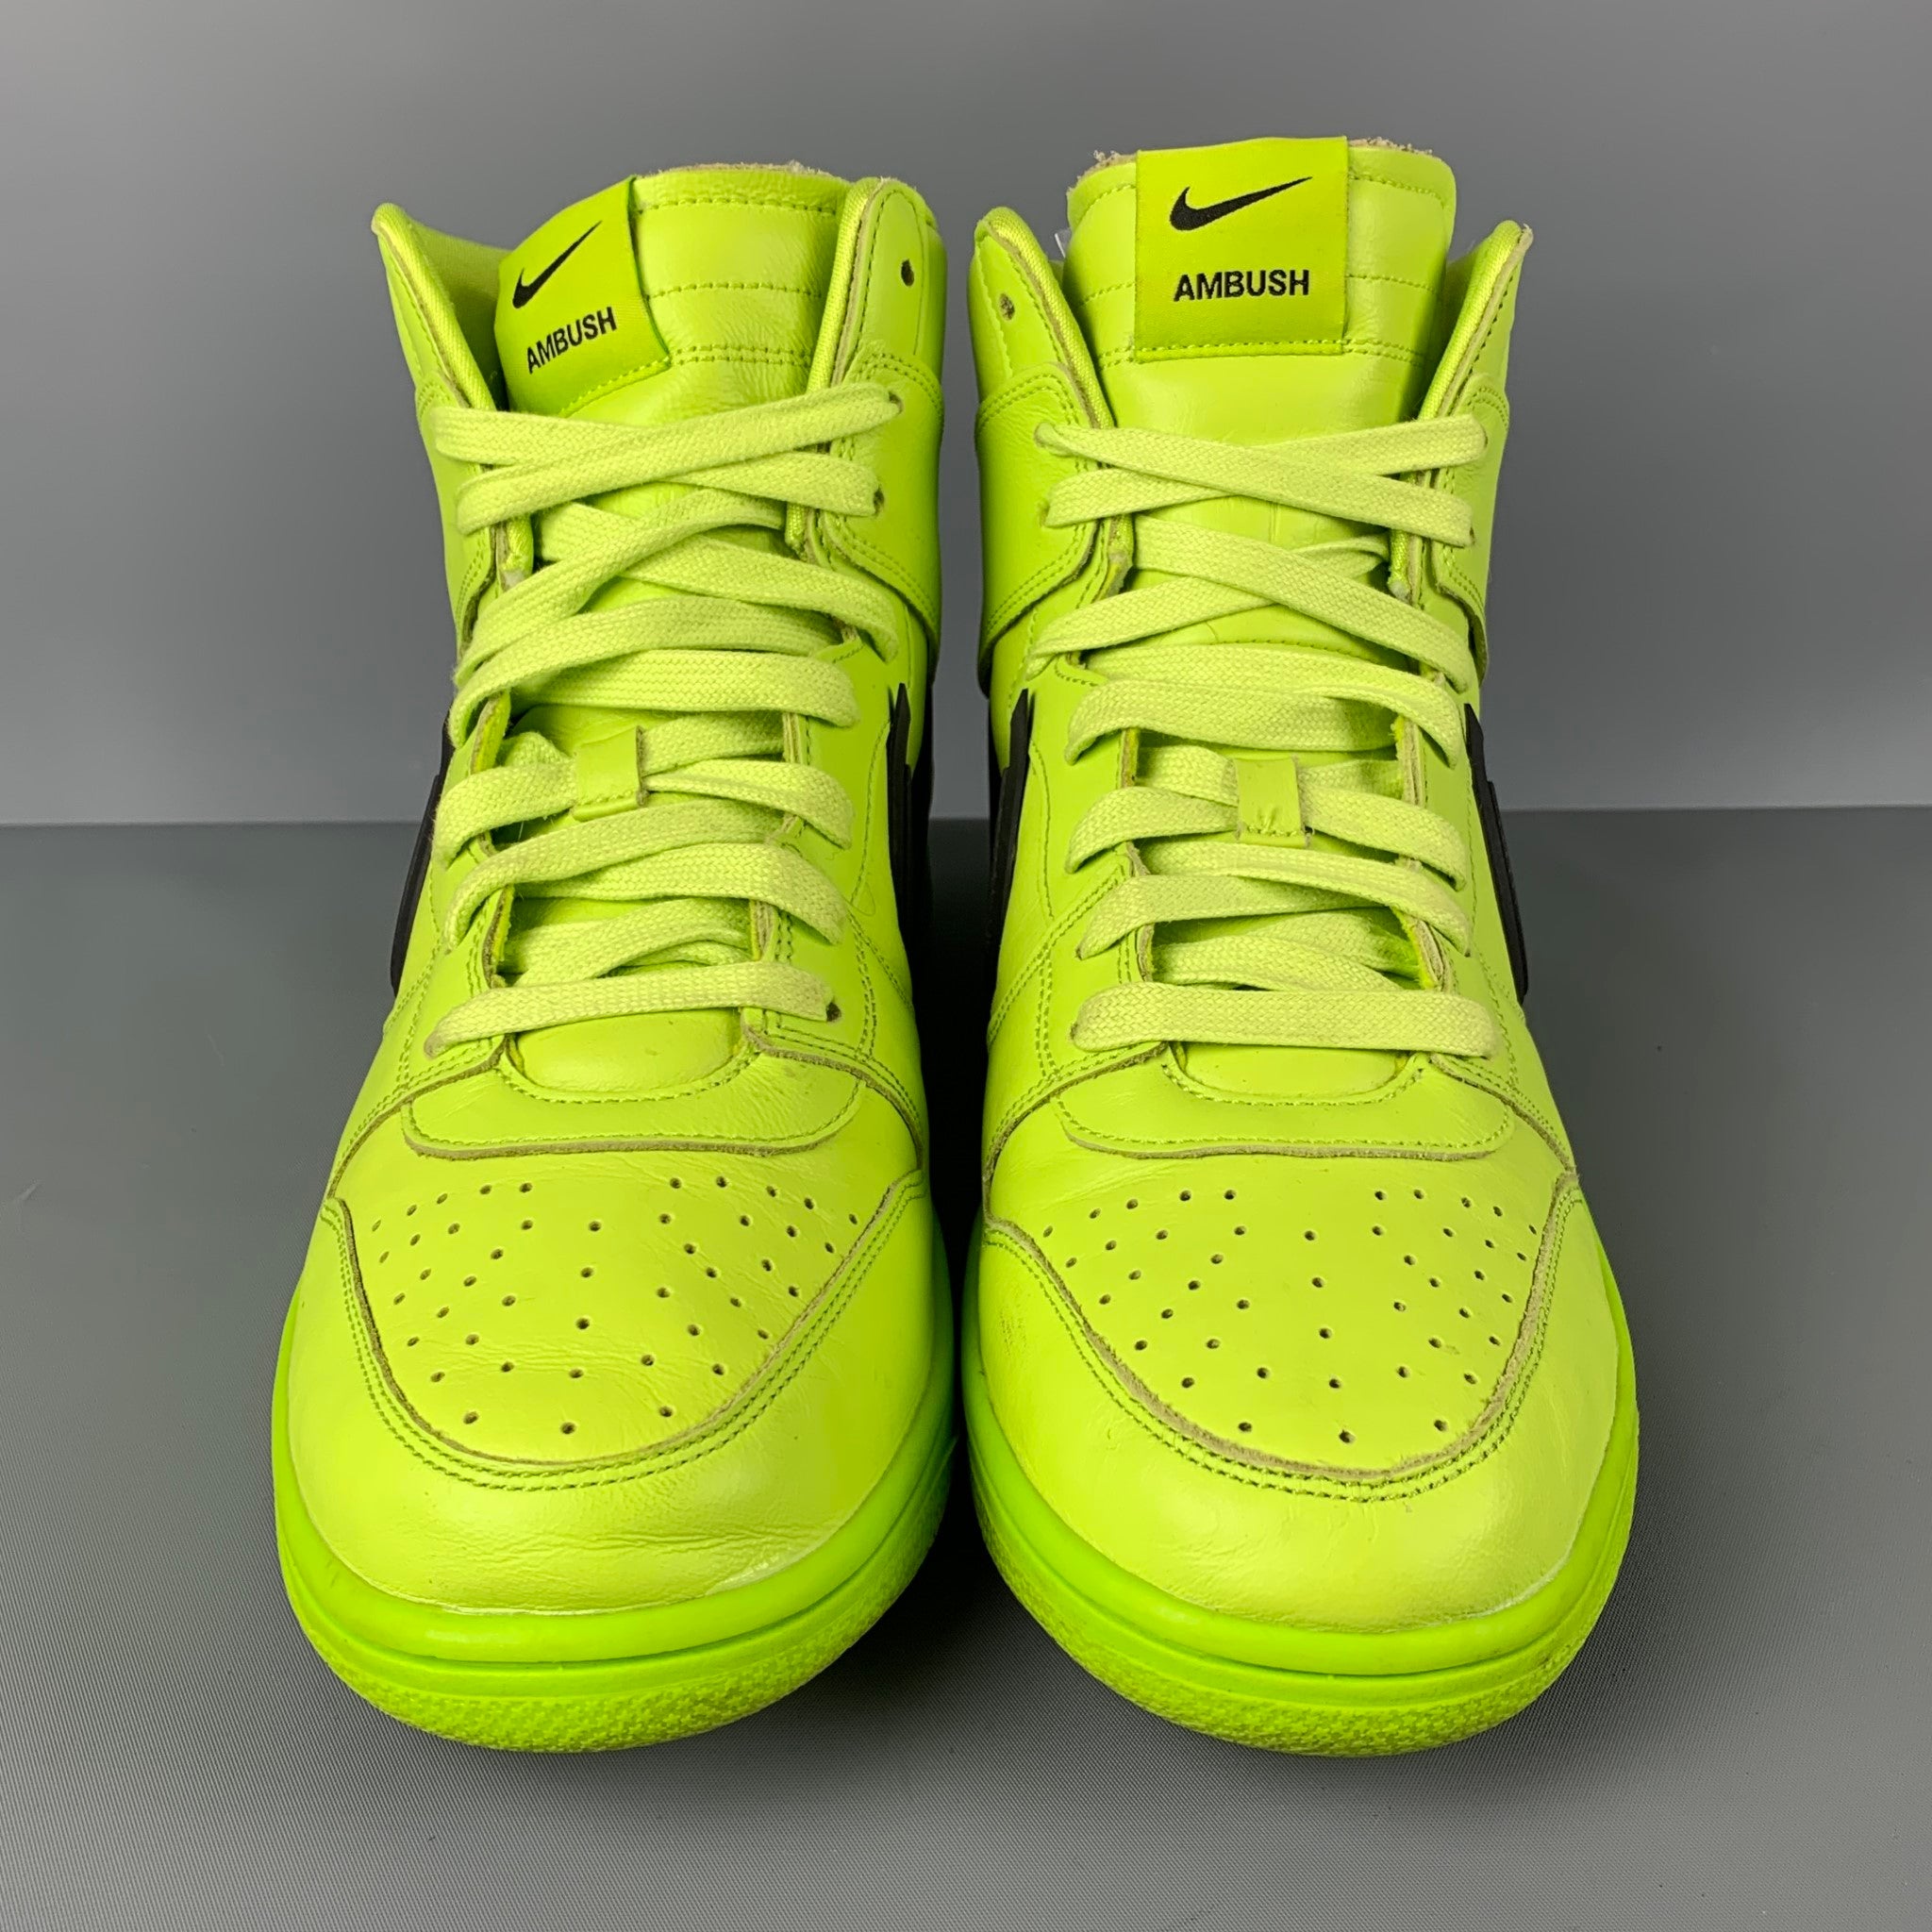 AMBUSH x Nike Size 10.5 Flash Lime Leather High Top Sneakers – Sui 